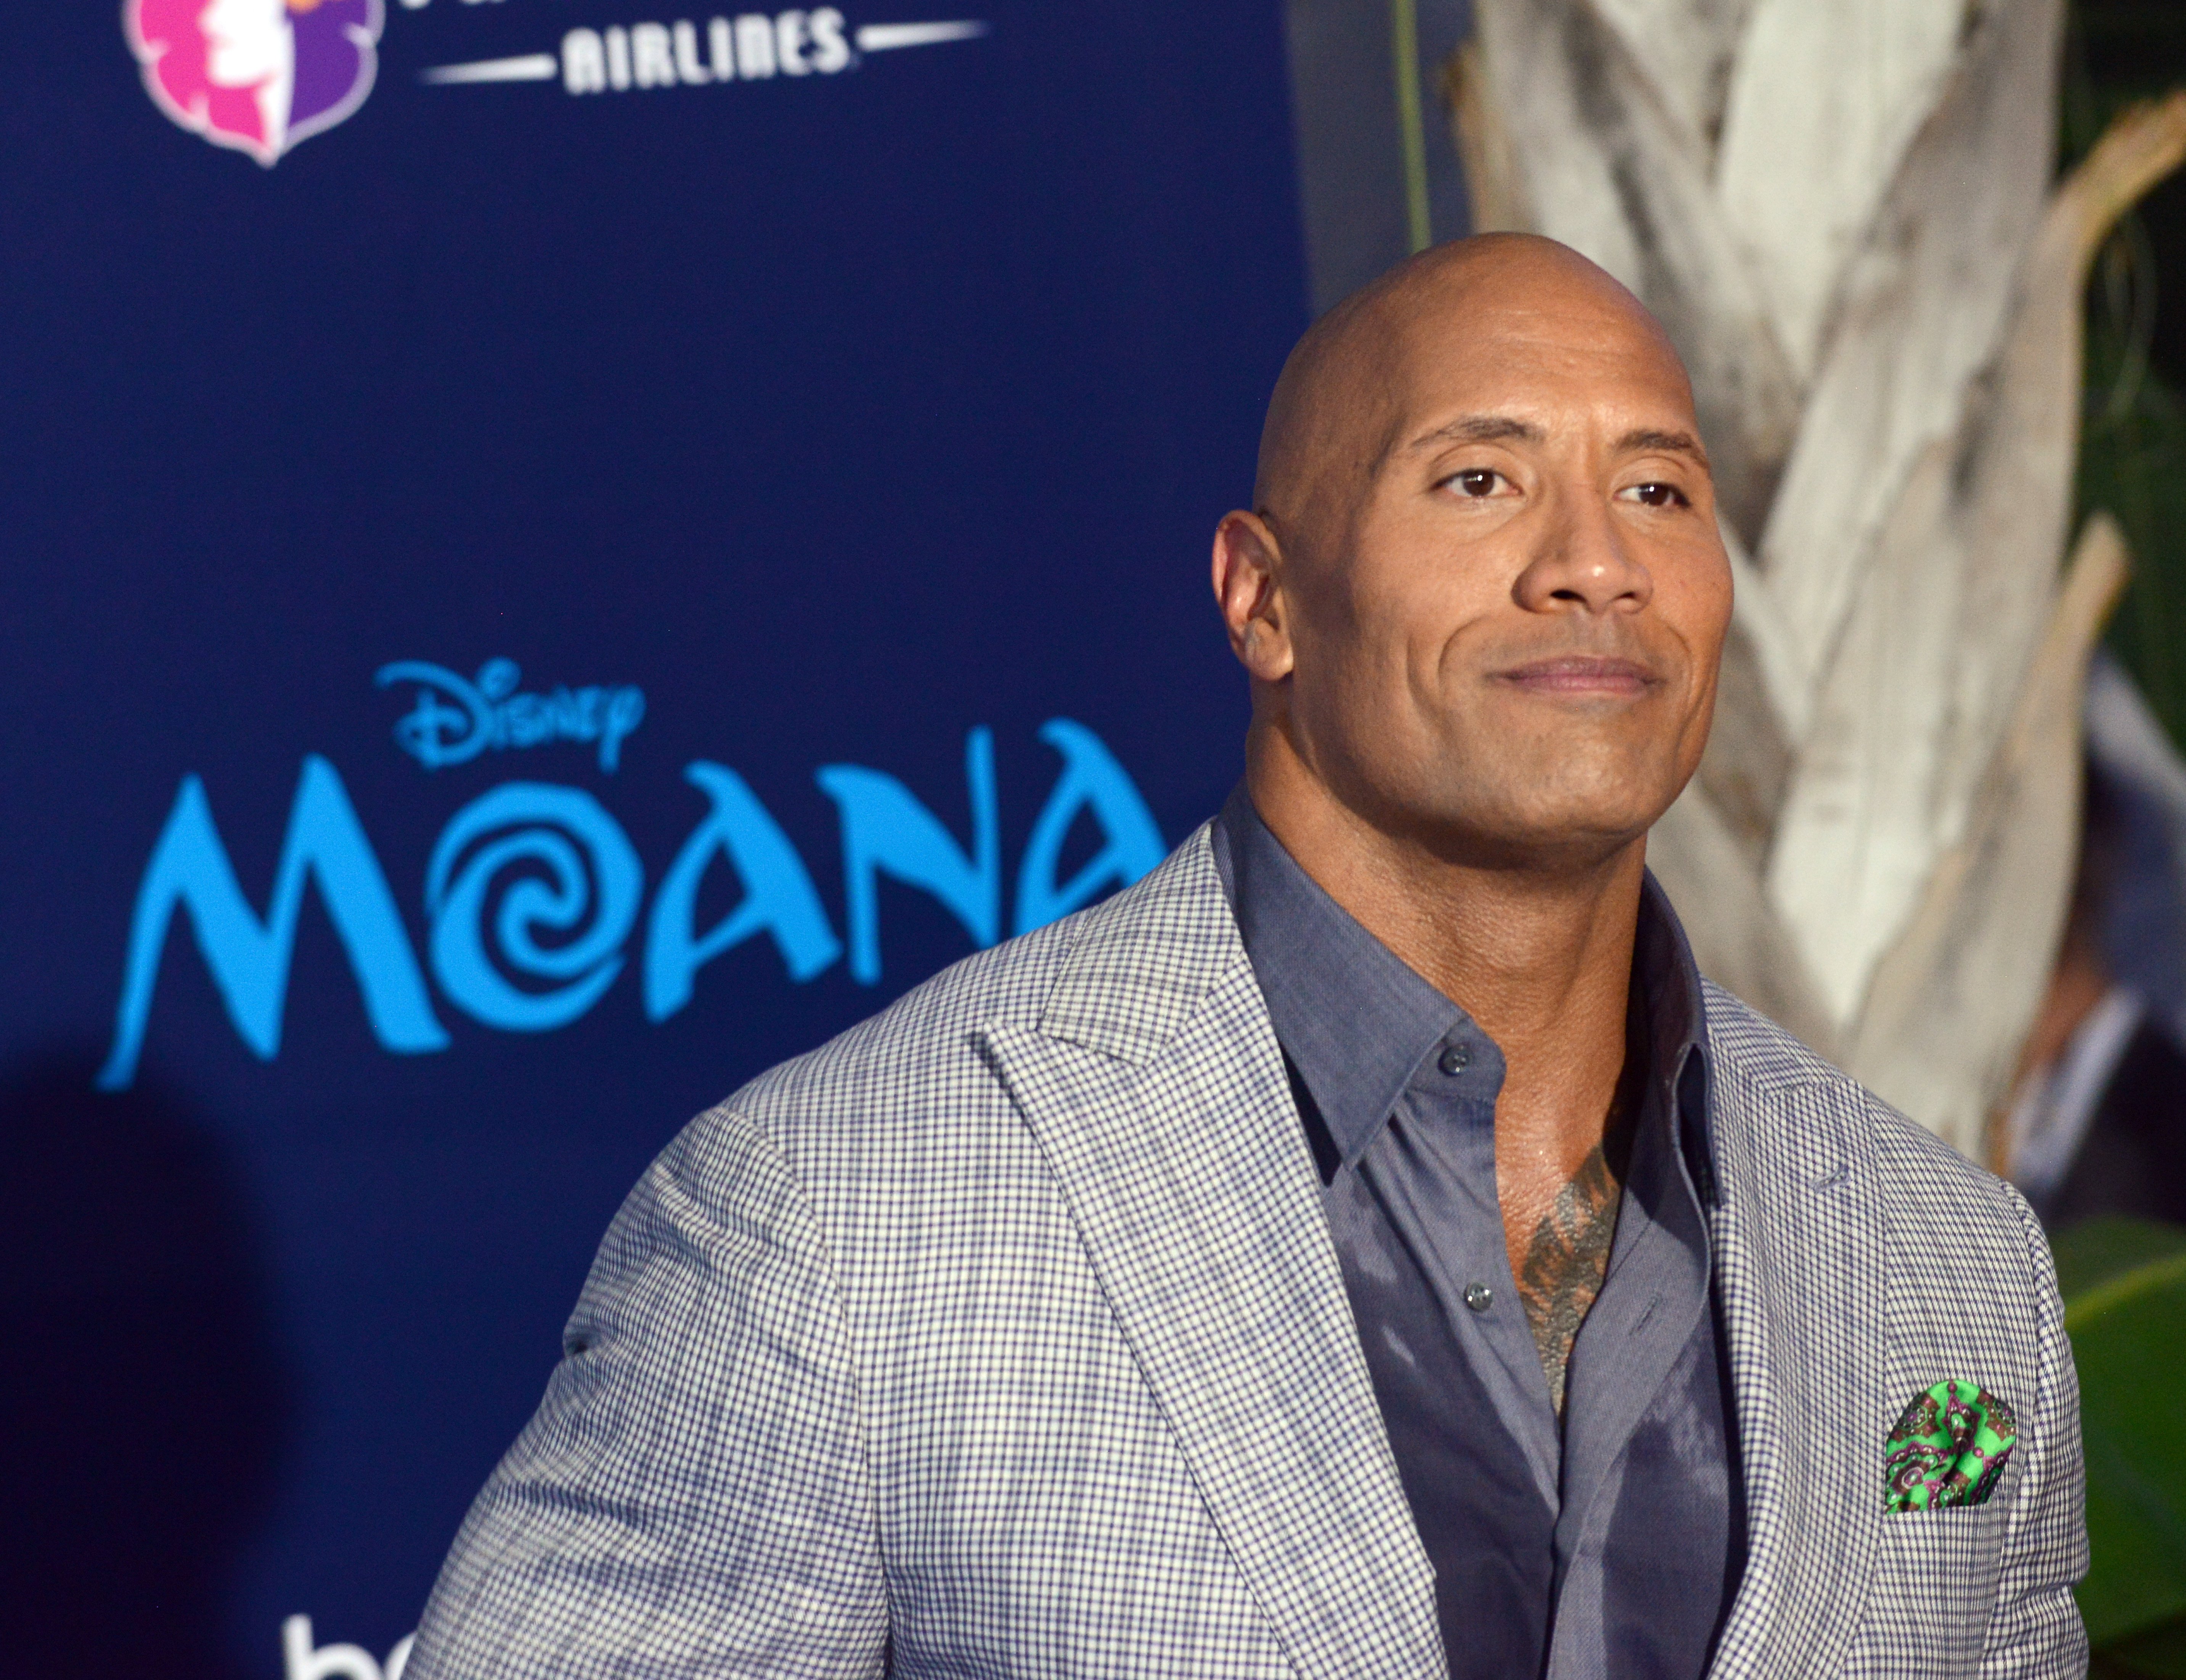 Dwayne Johnson arrives for the AFI FEST 2016 Presented By Audi - Premiere Of Disney's "Moana" held at the El Capitan Theatre on November 14, 2016, in Hollywood, California | Photo: Getty Images.